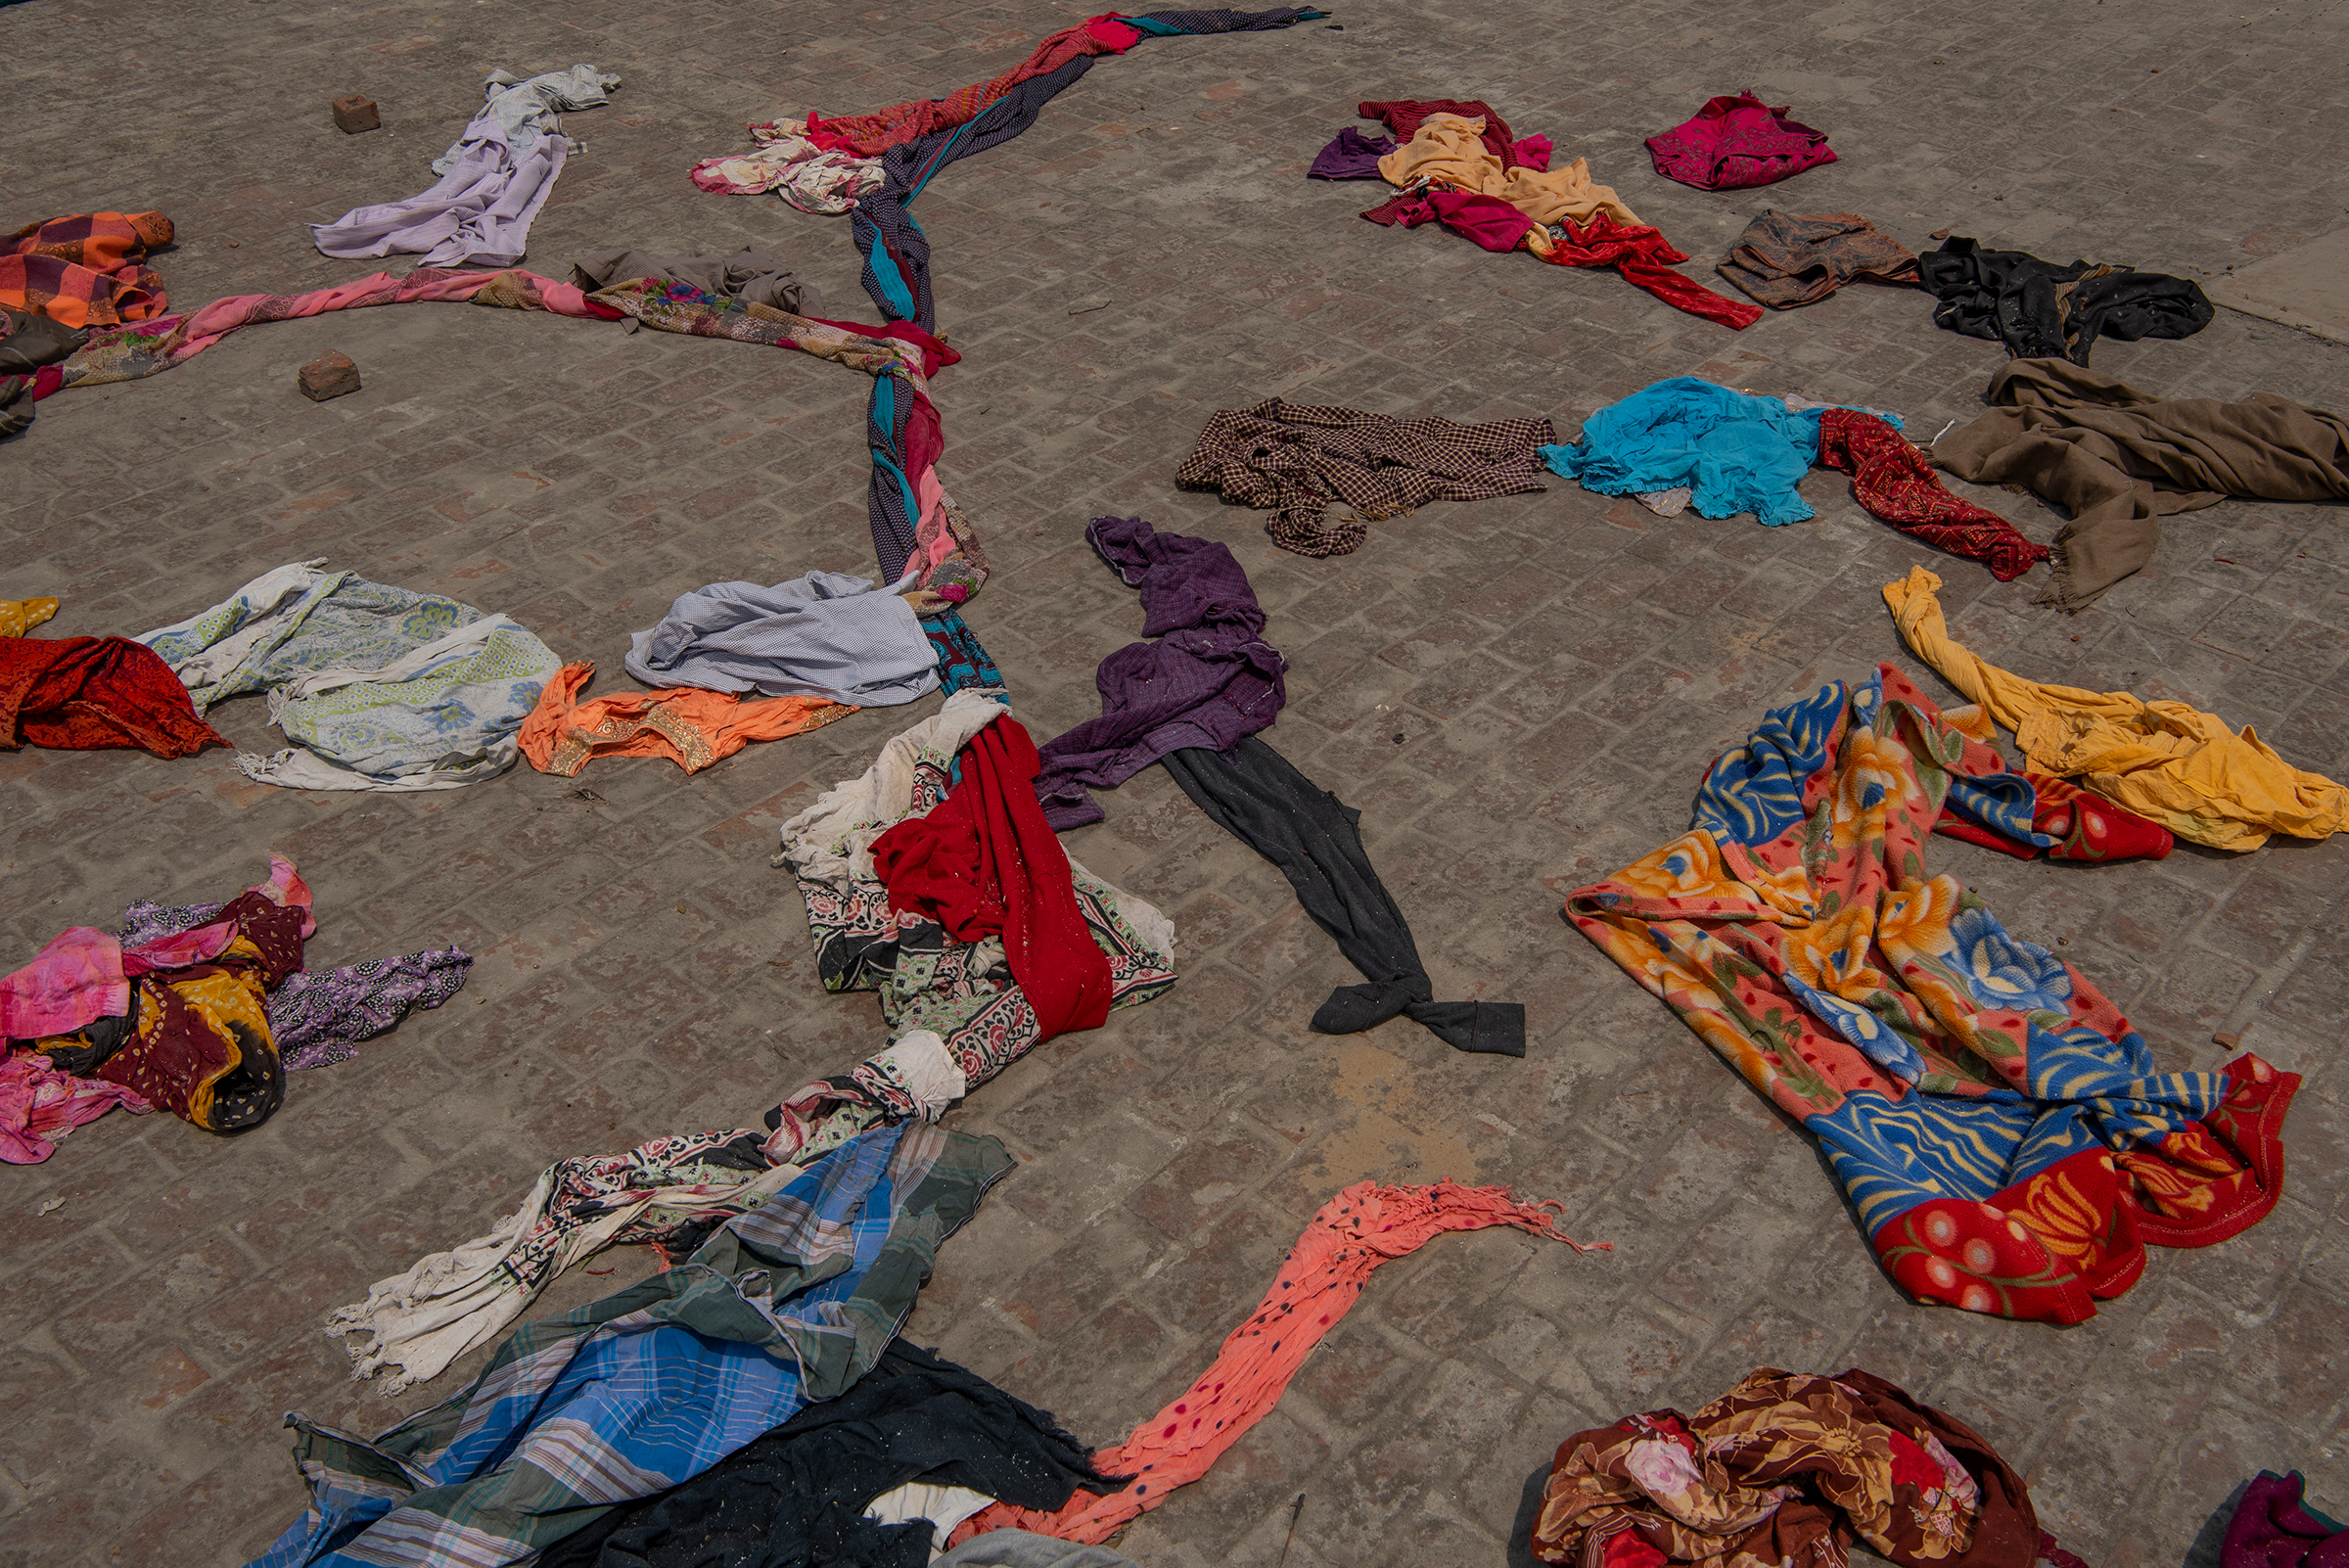 Clothes of the deceased lie on the terrace of a building within crematorium premises in New Delhi on April 27. (Saumya Khandelwal for TIME)